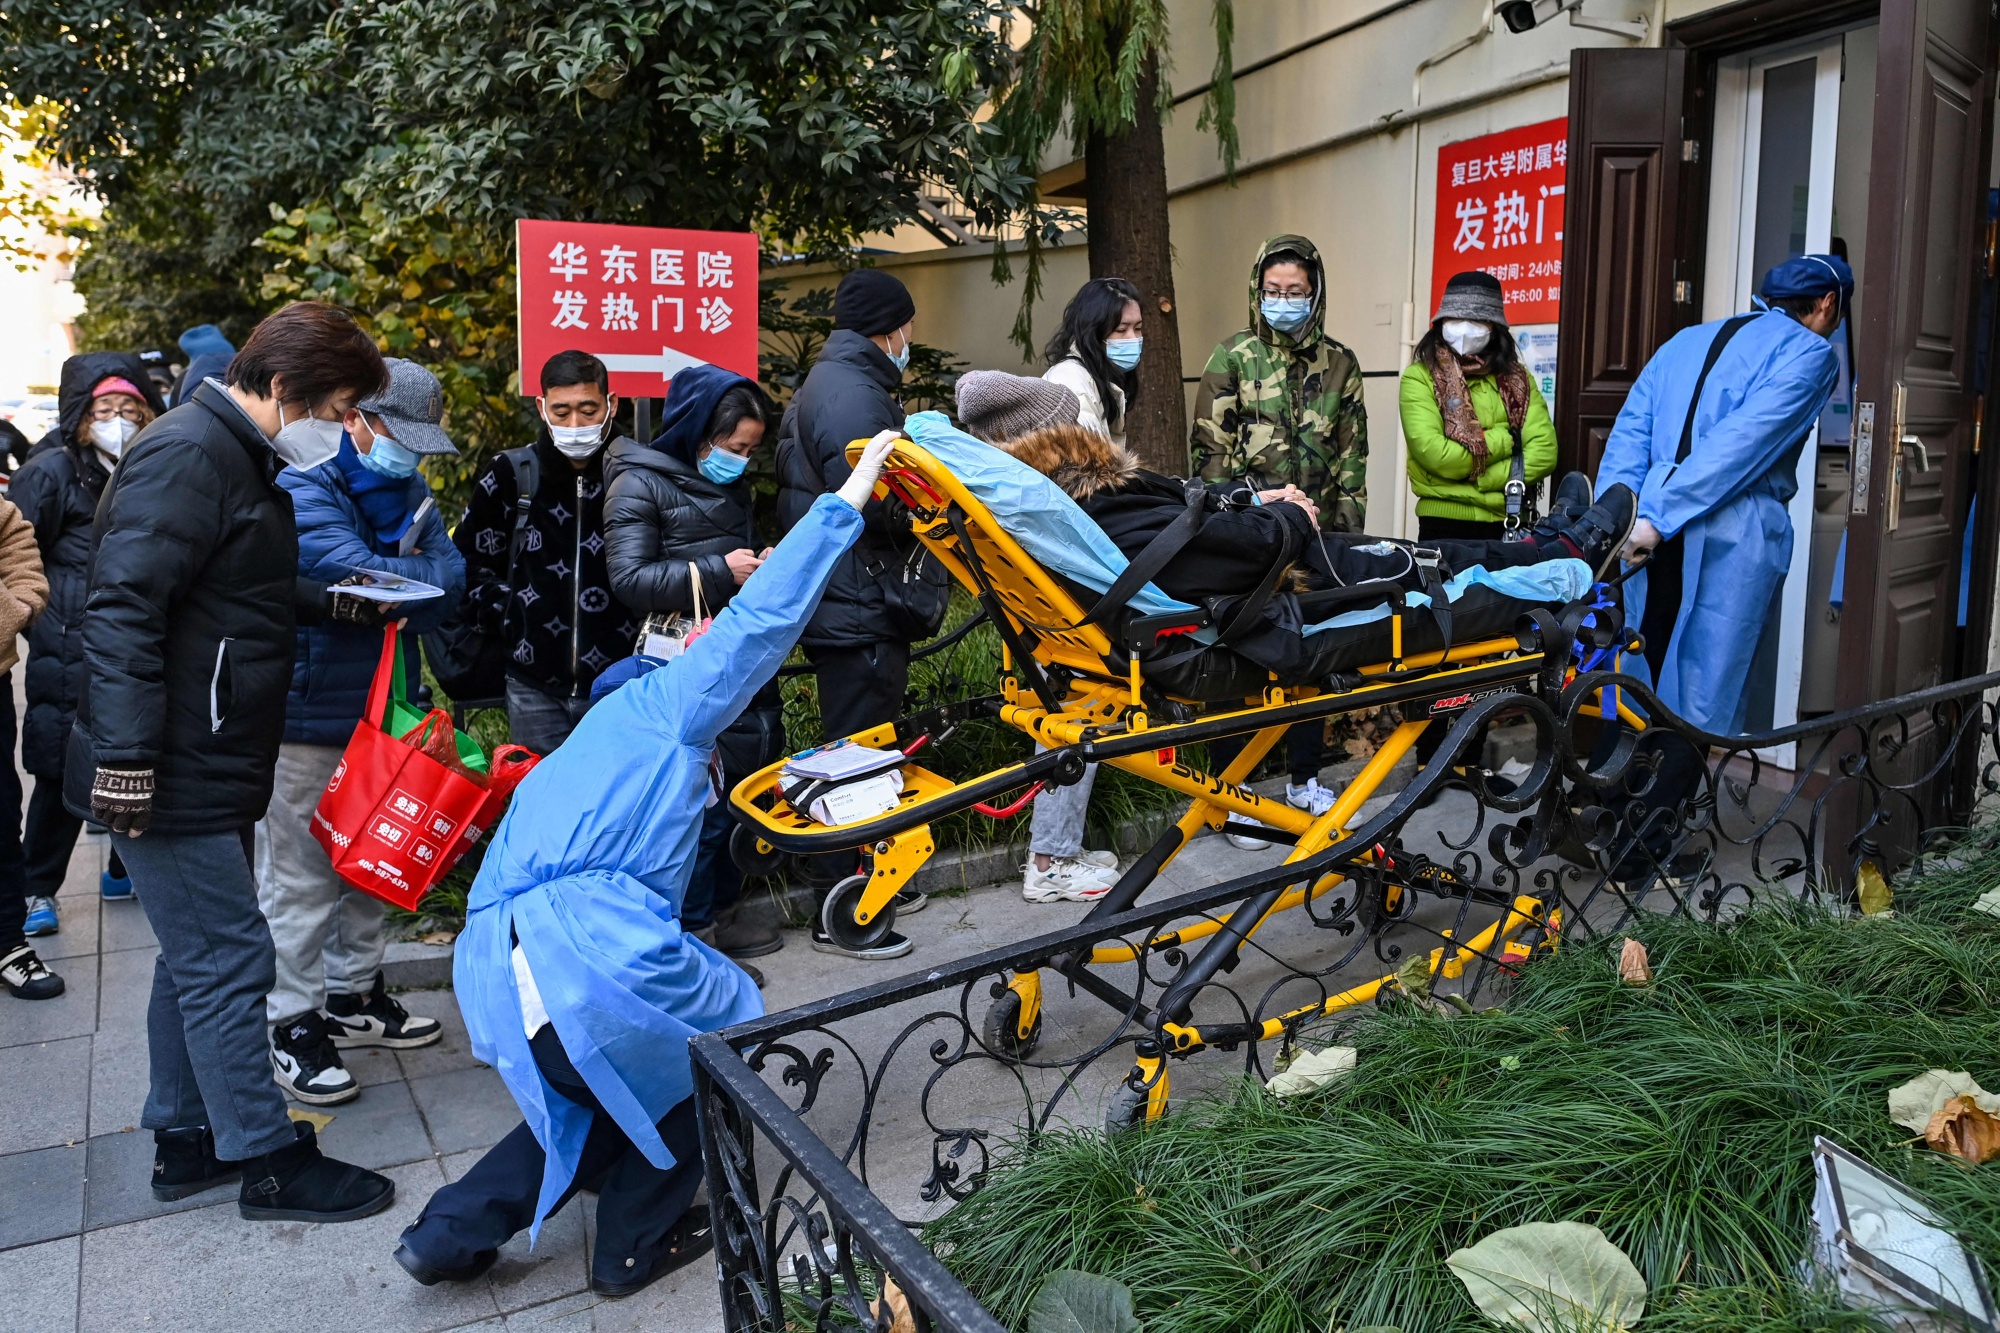 A patient is transported to a fever clinic at Huadong hospital in Shanghai on Dec. 19.